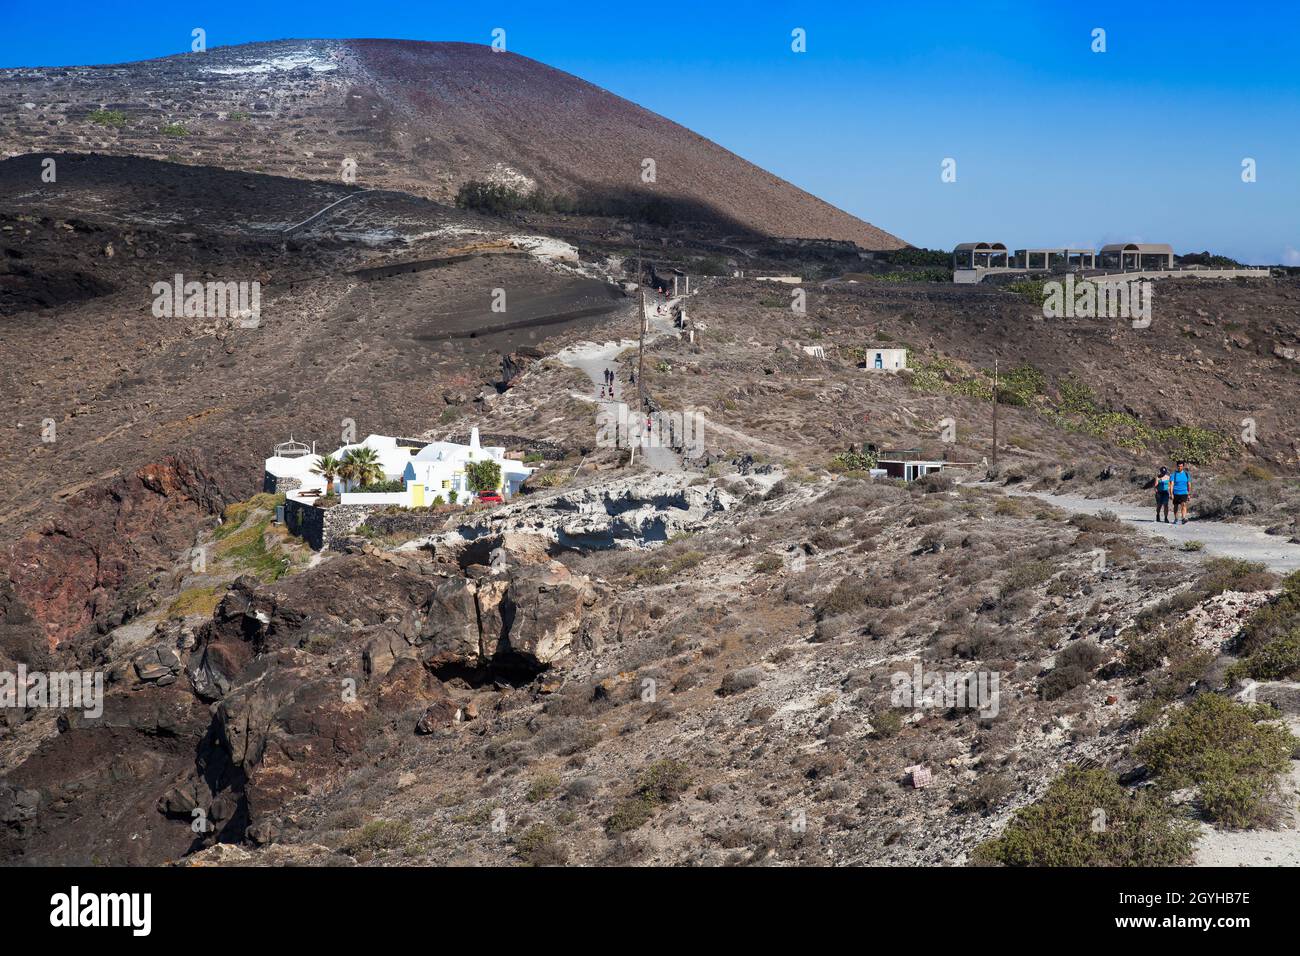 Hikers hike along the crater hiking trail, Santorini, Cyclades, Greece, Europe Stock Photo